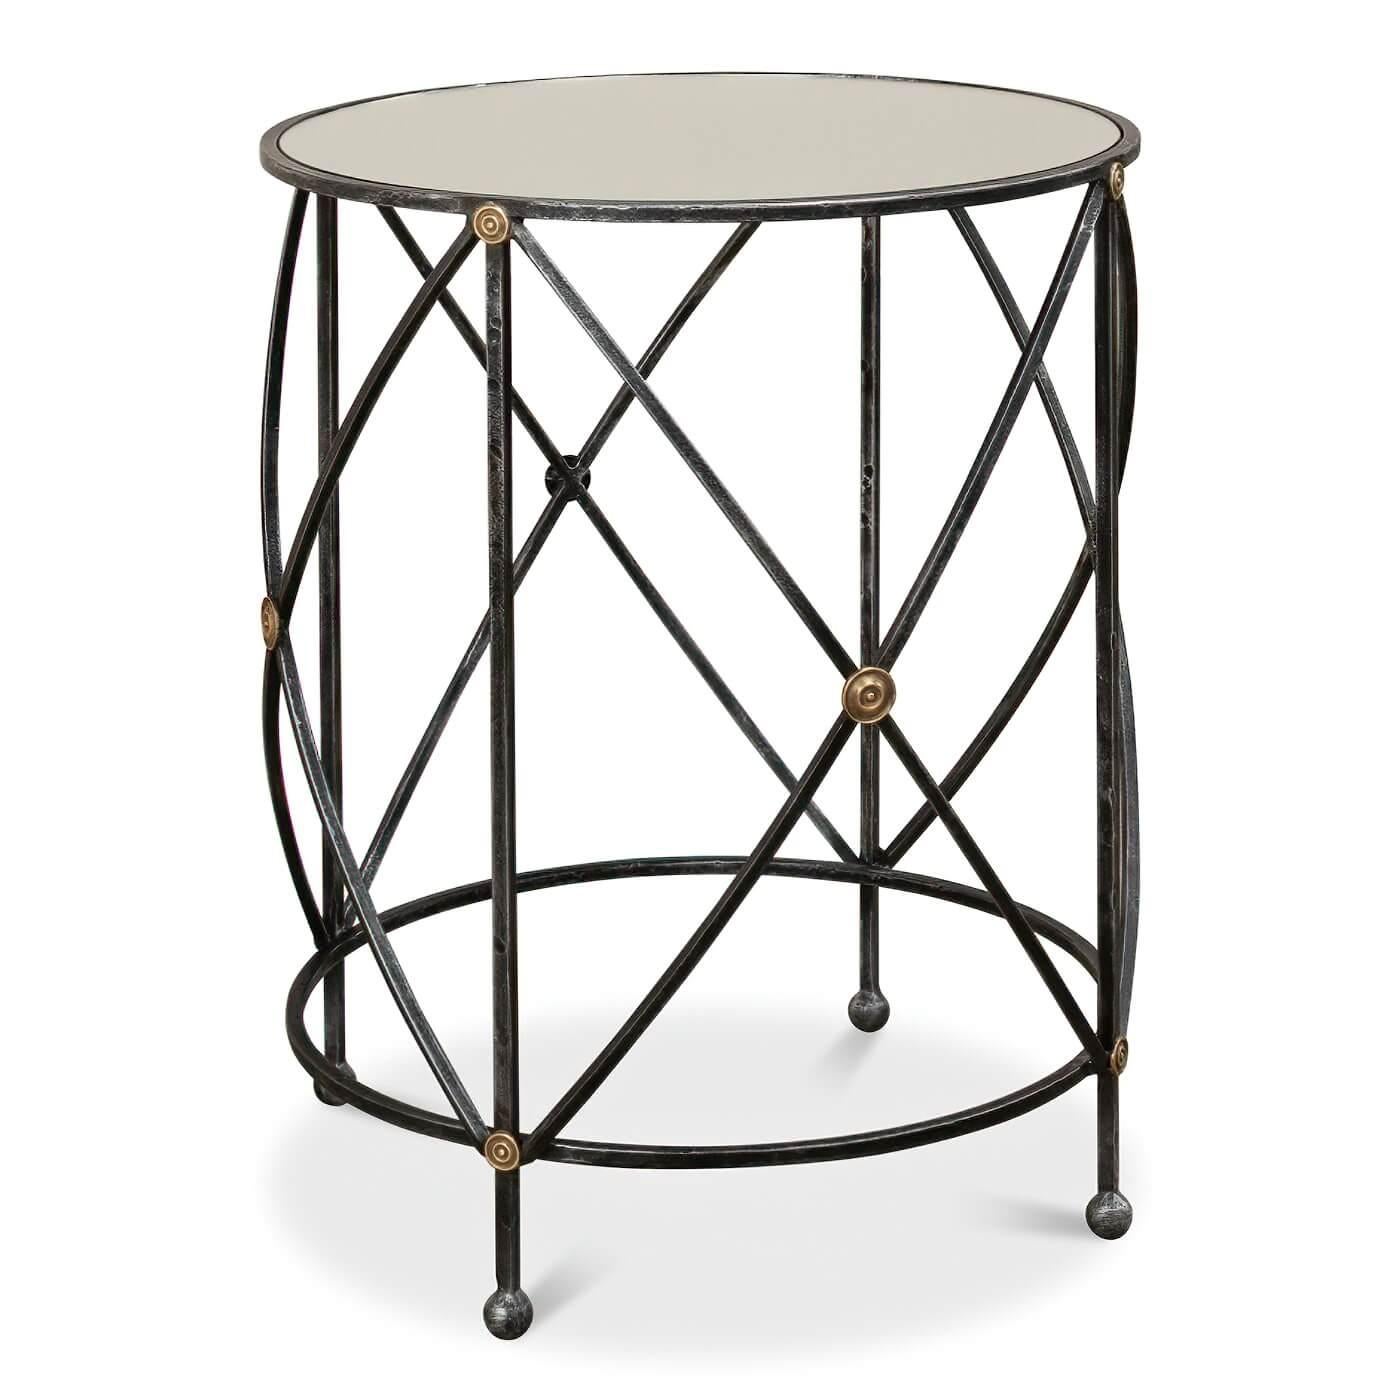 A drum and fife modern side table, the round accent table with a mirror glass top and an iron base with brass rosette accents raised on ball feet.

Dimensions: 24